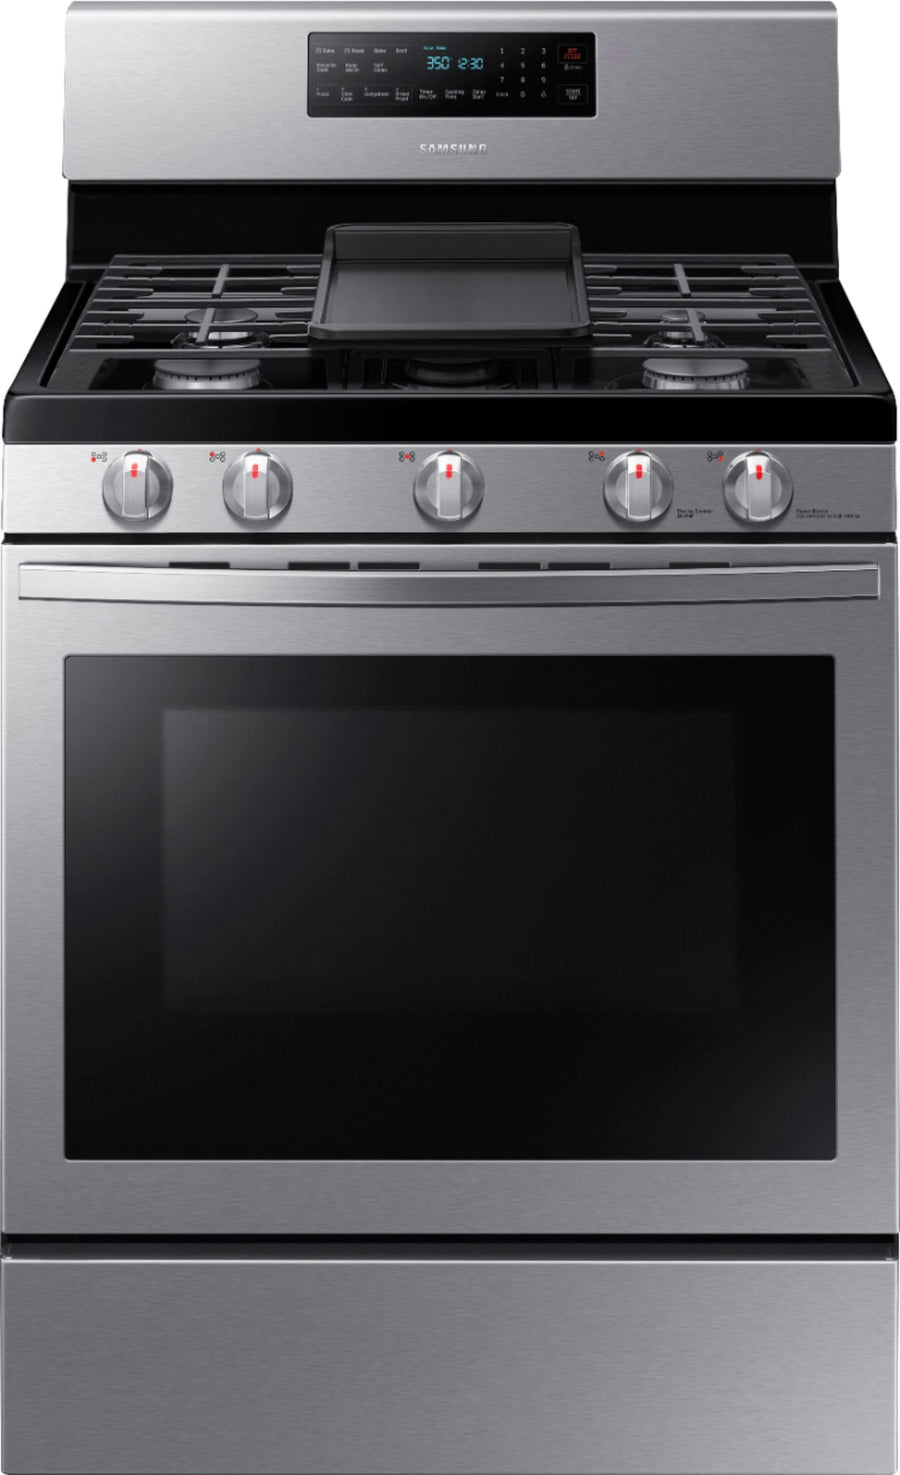 Samsung - 5.8 Cu. Ft. Freestanding Gas Convection Range with Air Fry - Stainless steel_0